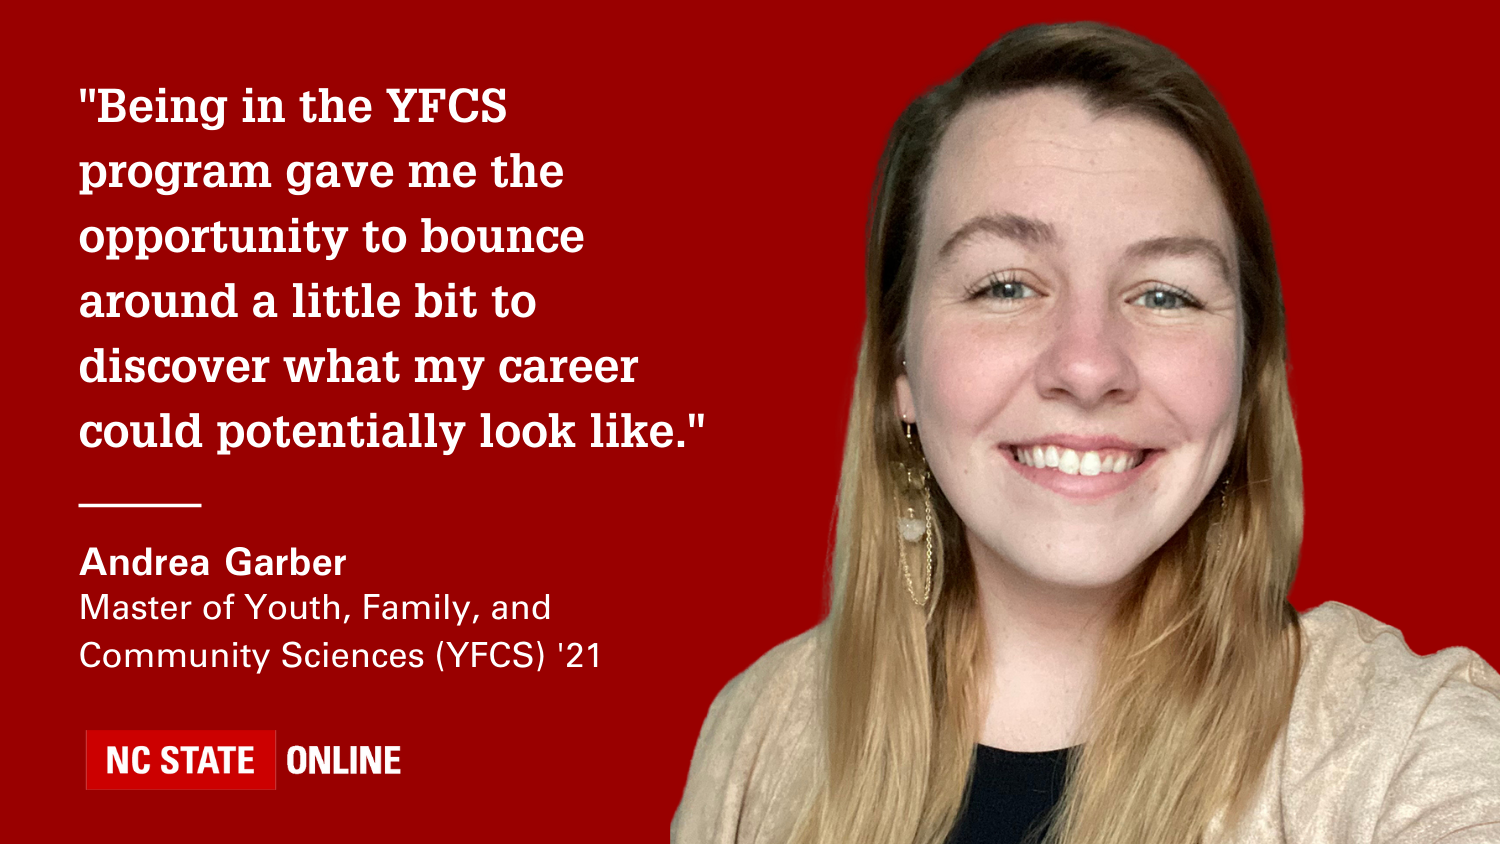 "Being in the YFCS program gave me the opportunity to bounce around a little bit to discover what my career could potentially look like." -- Andrea Garber Master of Youth, Family, and Community Sciences (YFCS) '21